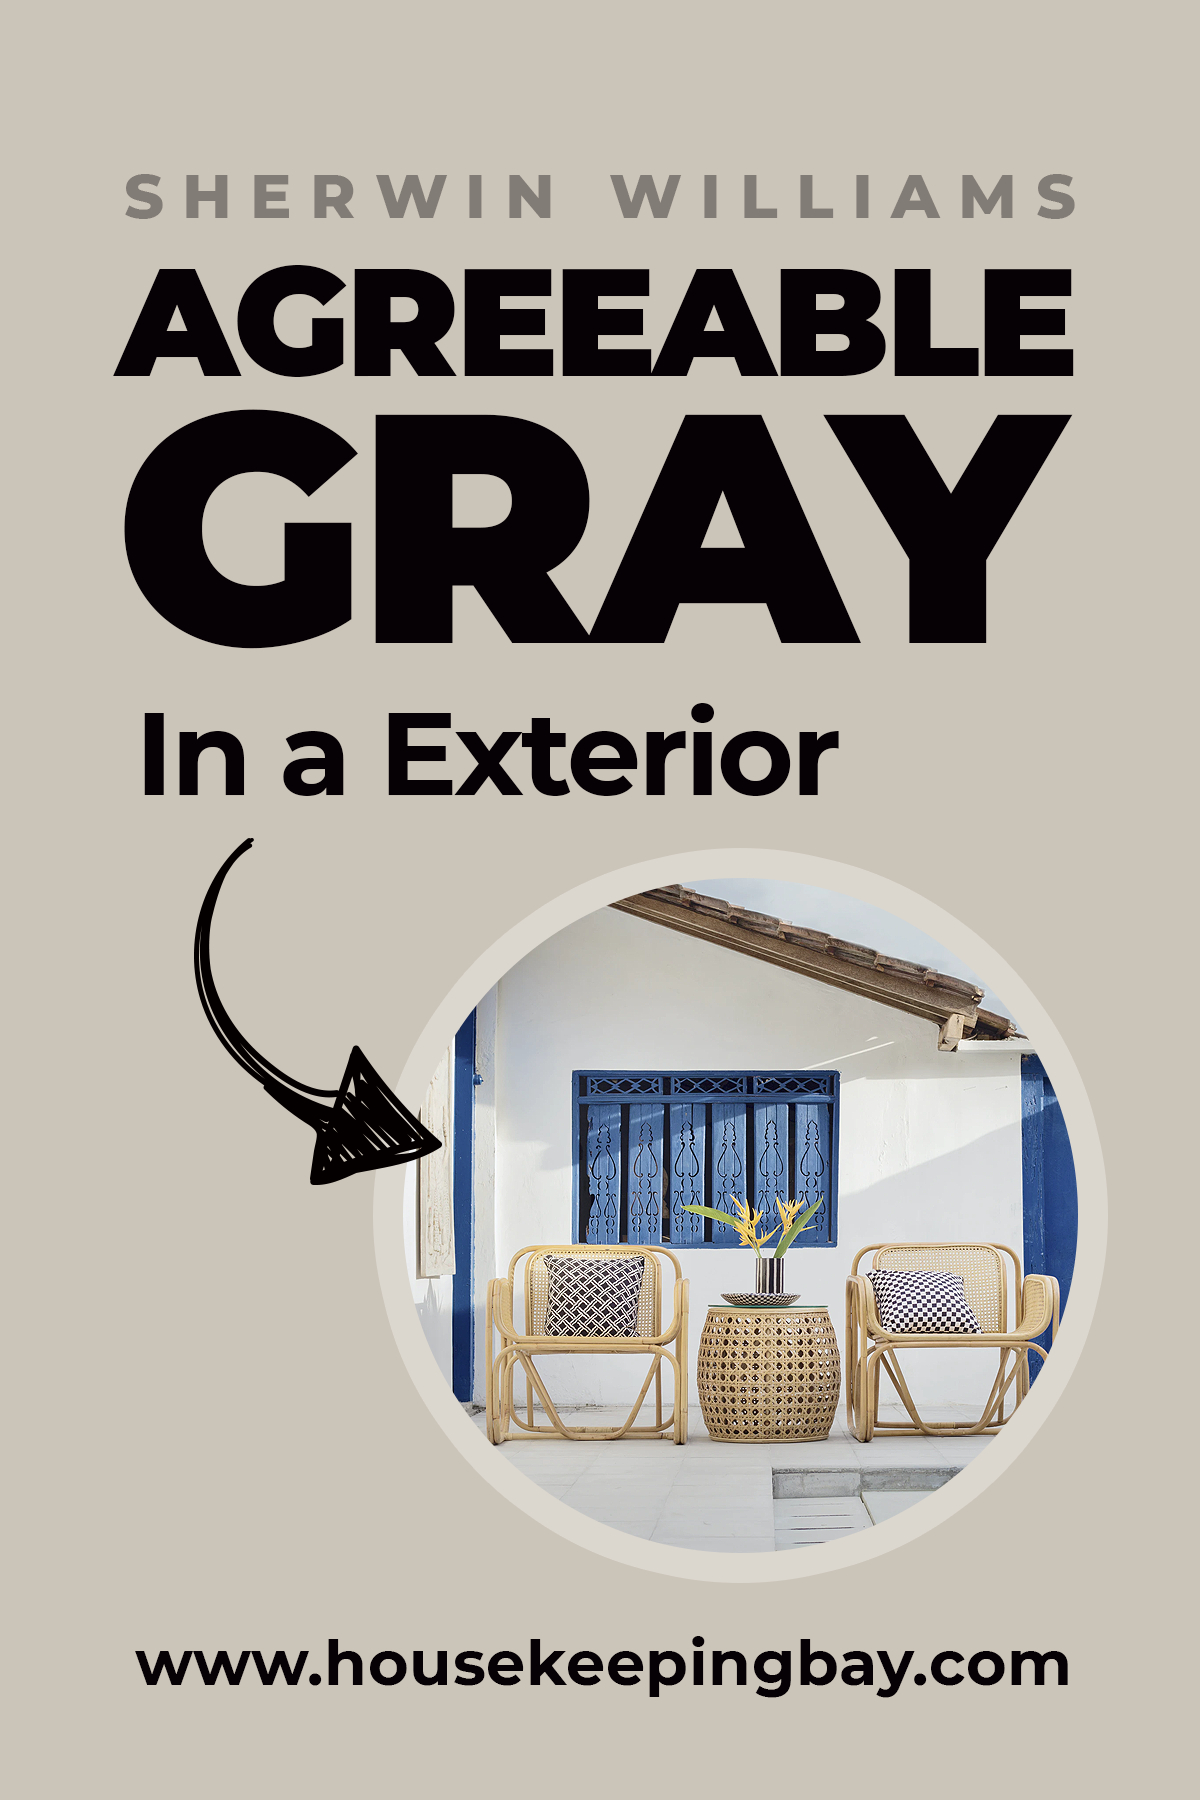 Agreeable Gray in a Exterior – Copy